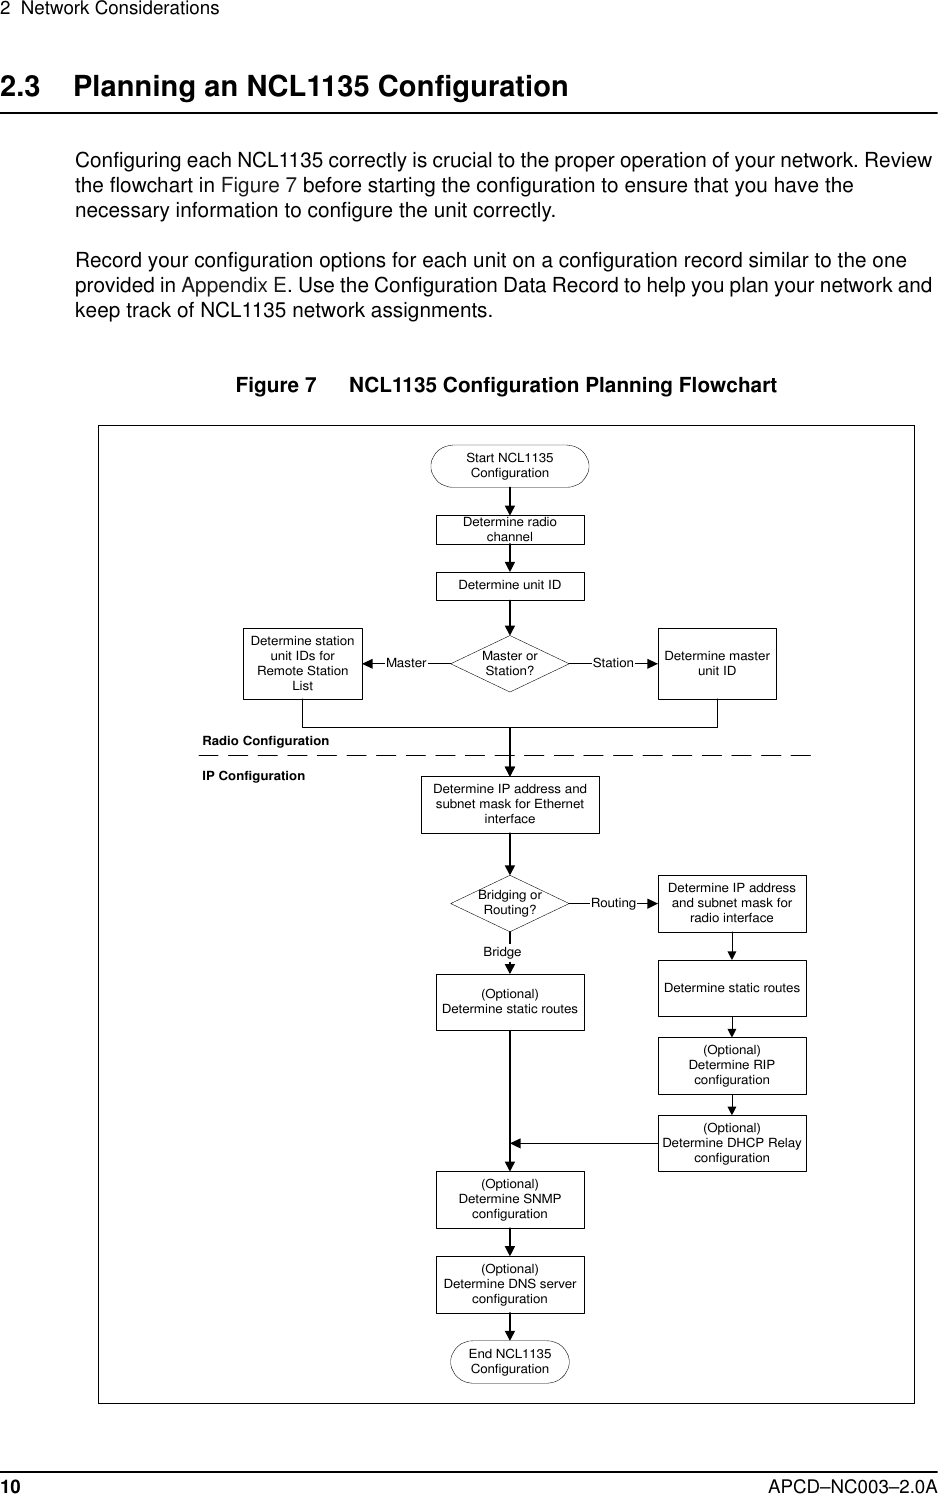 2  Network Considerations10 APCD–NC003–2.0A2.3    Planning an NCL1135 ConfigurationConfiguring each NCL1135 correctly is crucial to the proper operation of your network. Review the flowchart in Figure 7 before starting the configuration to ensure that you have the necessary information to configure the unit correctly. Record your configuration options for each unit on a configuration record similar to the one provided in Appendix E. Use the Configuration Data Record to help you plan your network and keep track of NCL1135 network assignments.Figure 7   NCL1135 Configuration Planning FlowchartStart NCL1135ConfigurationDetermine IP address andsubnet mask for EthernetinterfaceBridging orRouting?Determine IP addressand subnet mask forradio interface(Optional)Determine SNMPconfigurationDetermine static routes(Optional)Determine DNS serverconfigurationEnd NCL1135ConfigurationRoutingBridgeIP Configuration(Optional)Determine DHCP Relayconfiguration(Optional)Determine static routesMaster orStation?Determine radiochannelDetermine unit IDDetermine stationunit IDs forRemote StationListDetermine masterunit IDStationMasterRadio Configuration(Optional)Determine RIPconfiguration